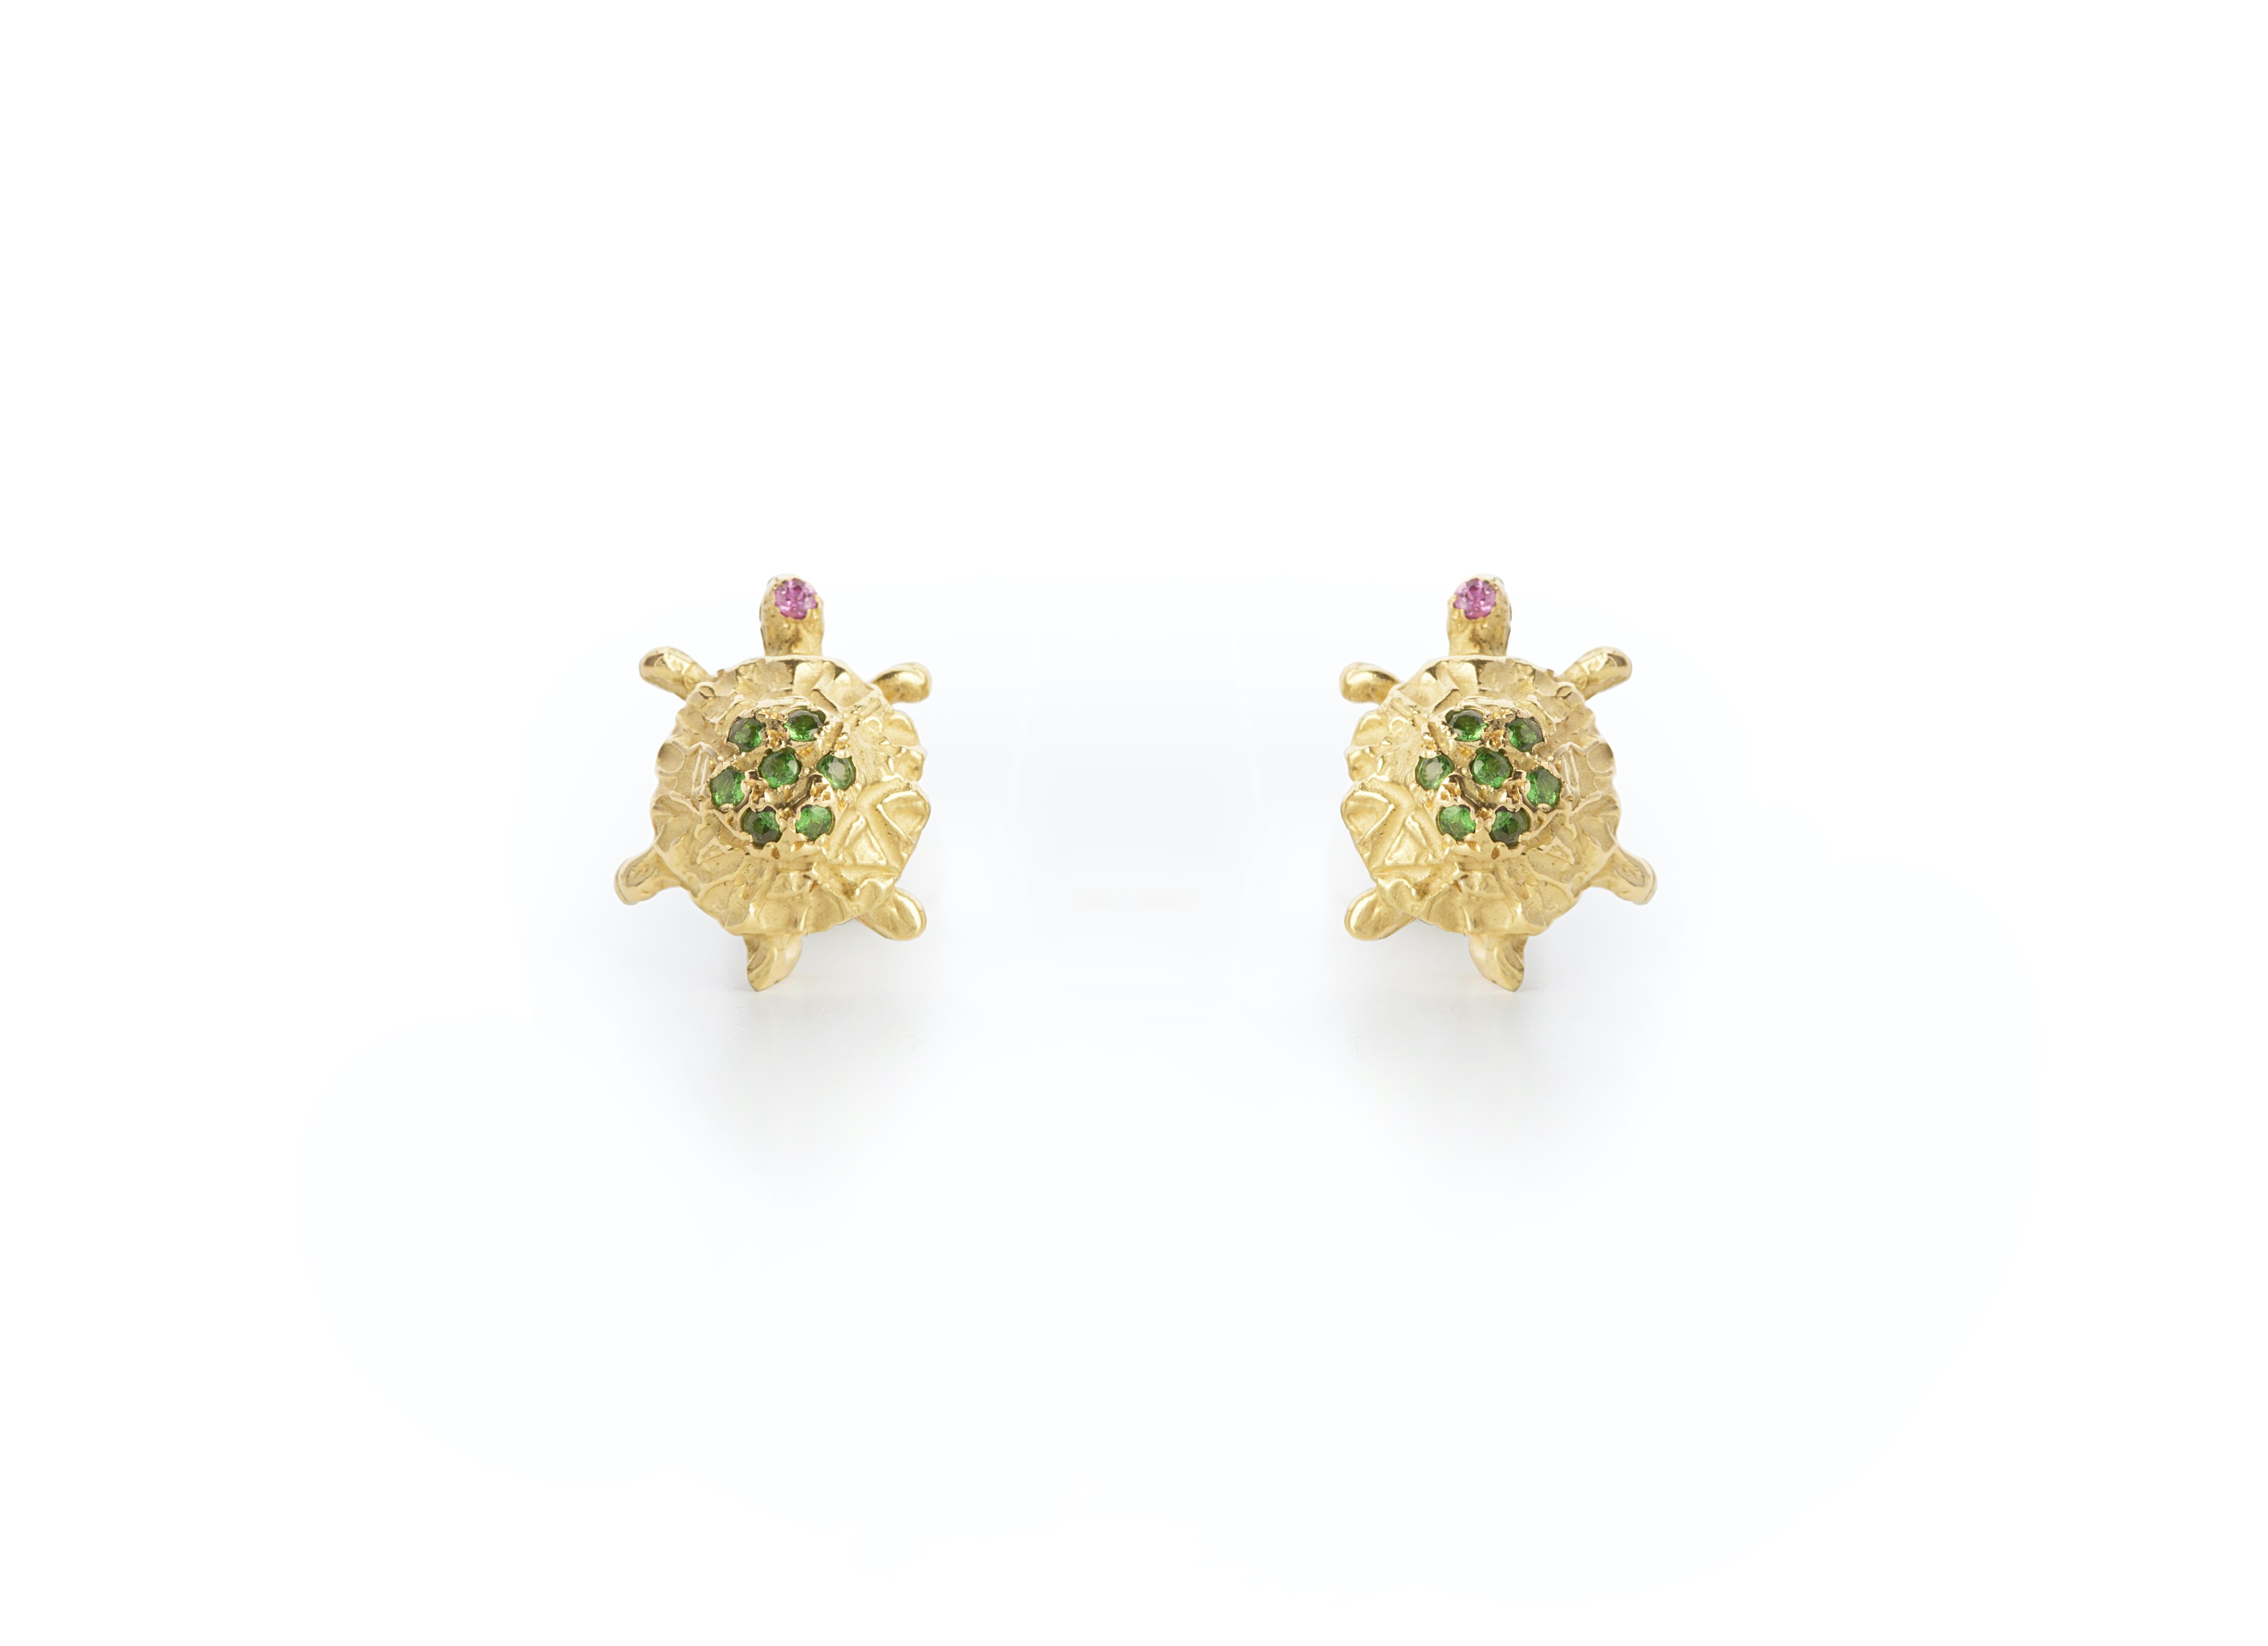 A pair of Little Turtles Stud Earrings handcrafted in 18 Karats Yellow Gold and adorned with a beautiful deep green tsavorite stone and pink tourmaline eyes.
This earrings are customizable with different stones on order: Amethyst, Garnet, Diamonds,